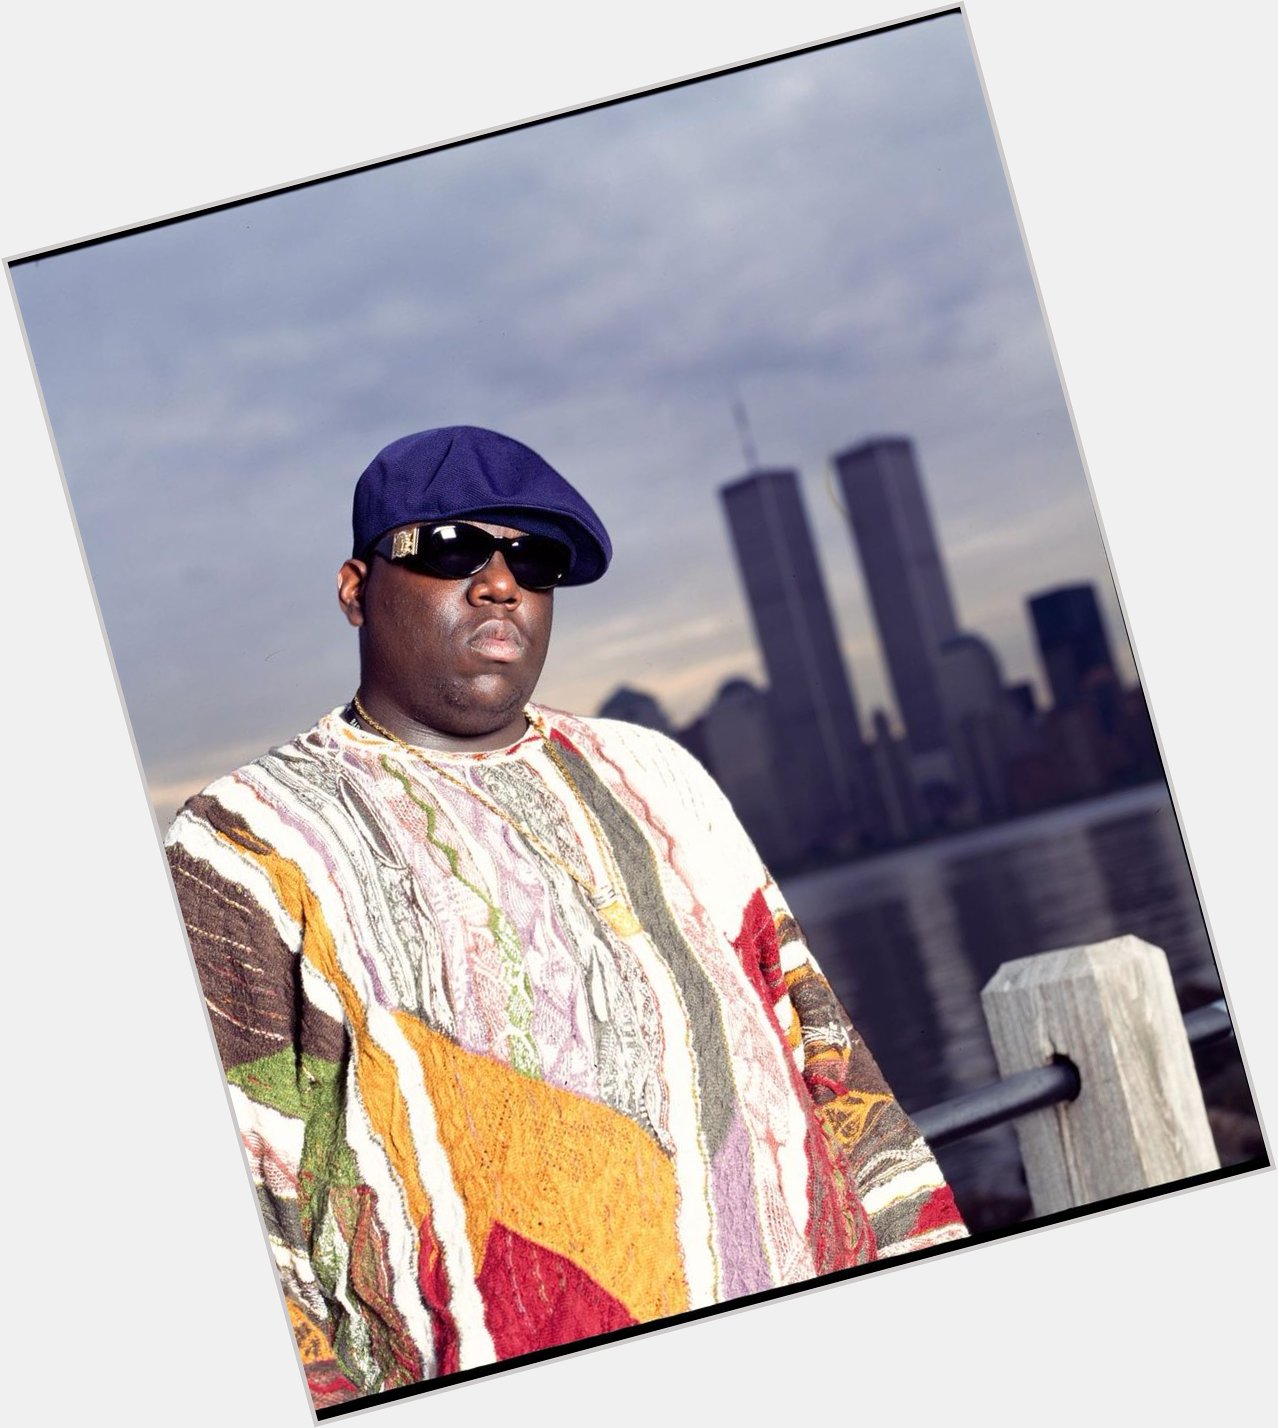 Happy Heavenly 50th Birthday to one of the greatest to ever grab the Mic, The Notorious B.I.G. 